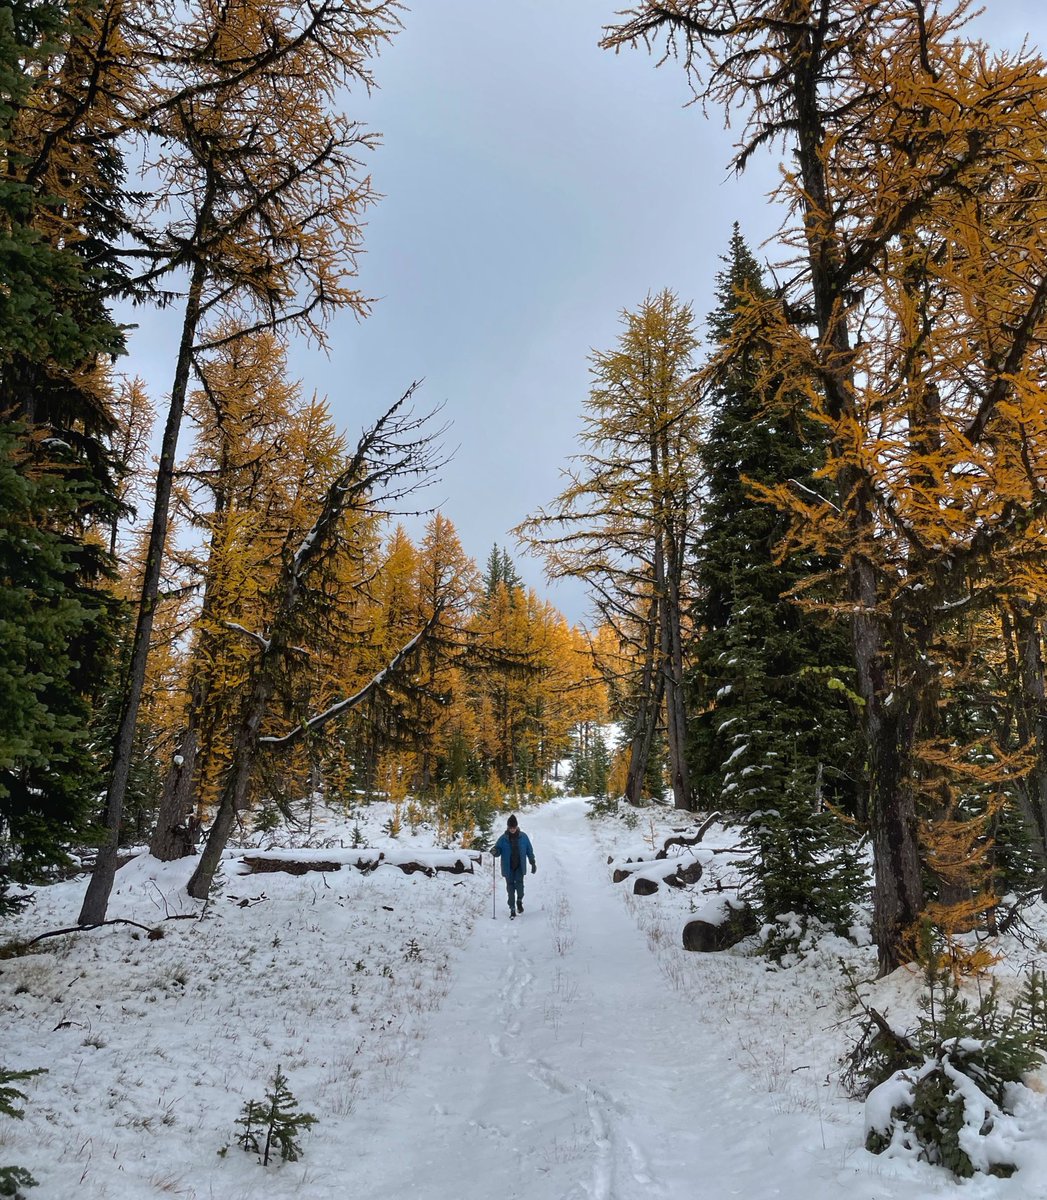 There is something so majestic about walking through the first snow of the season.

📷@PowderMatt 

#mykimberley #winteriscoming #firstsnow